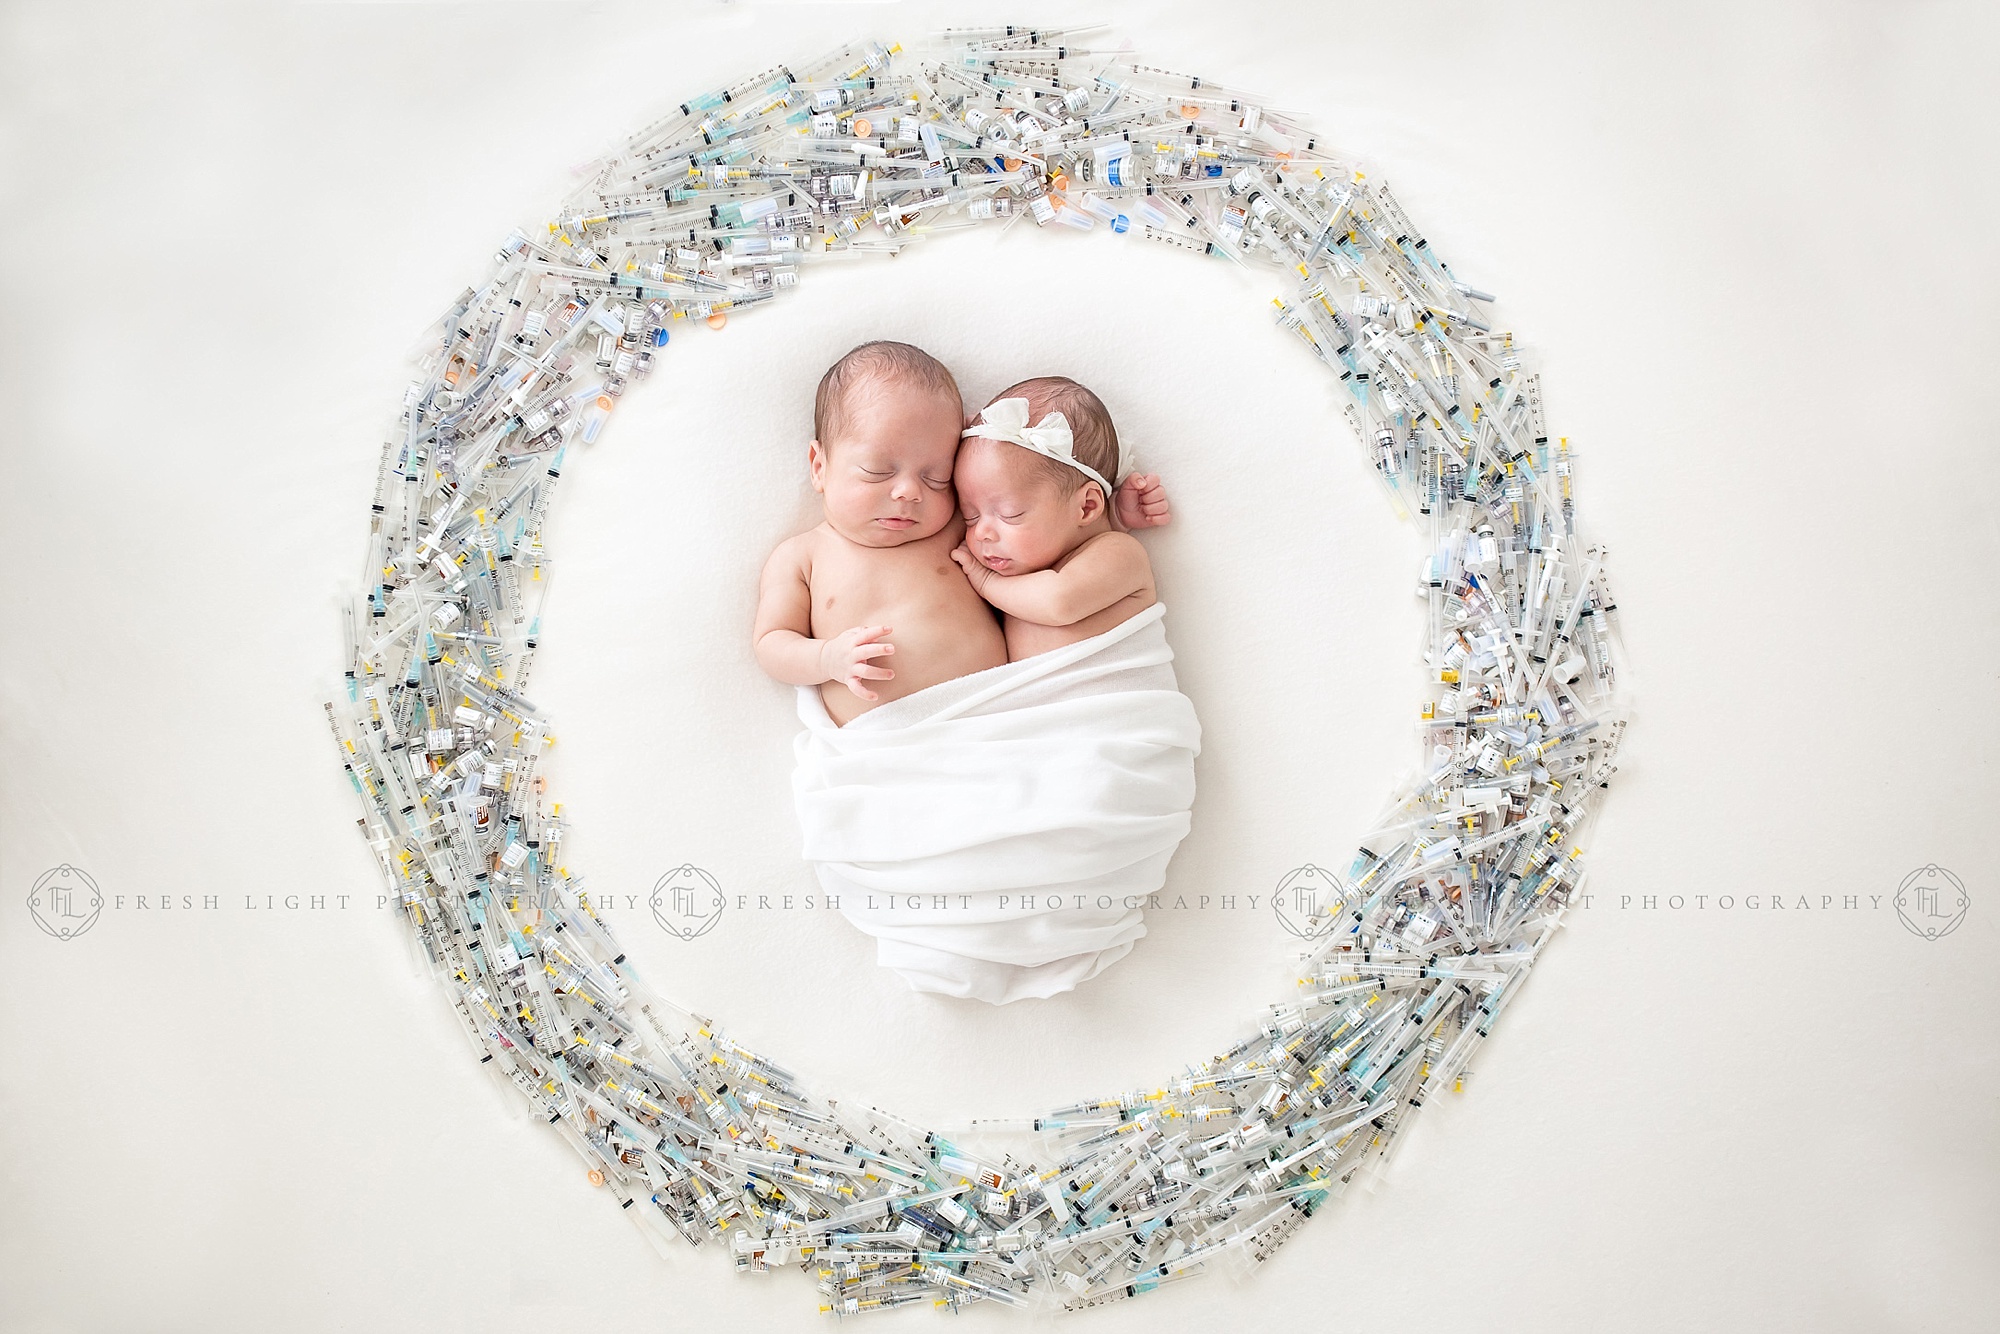 Newborn Twins surrounded by a infertility syringe wreath IVF